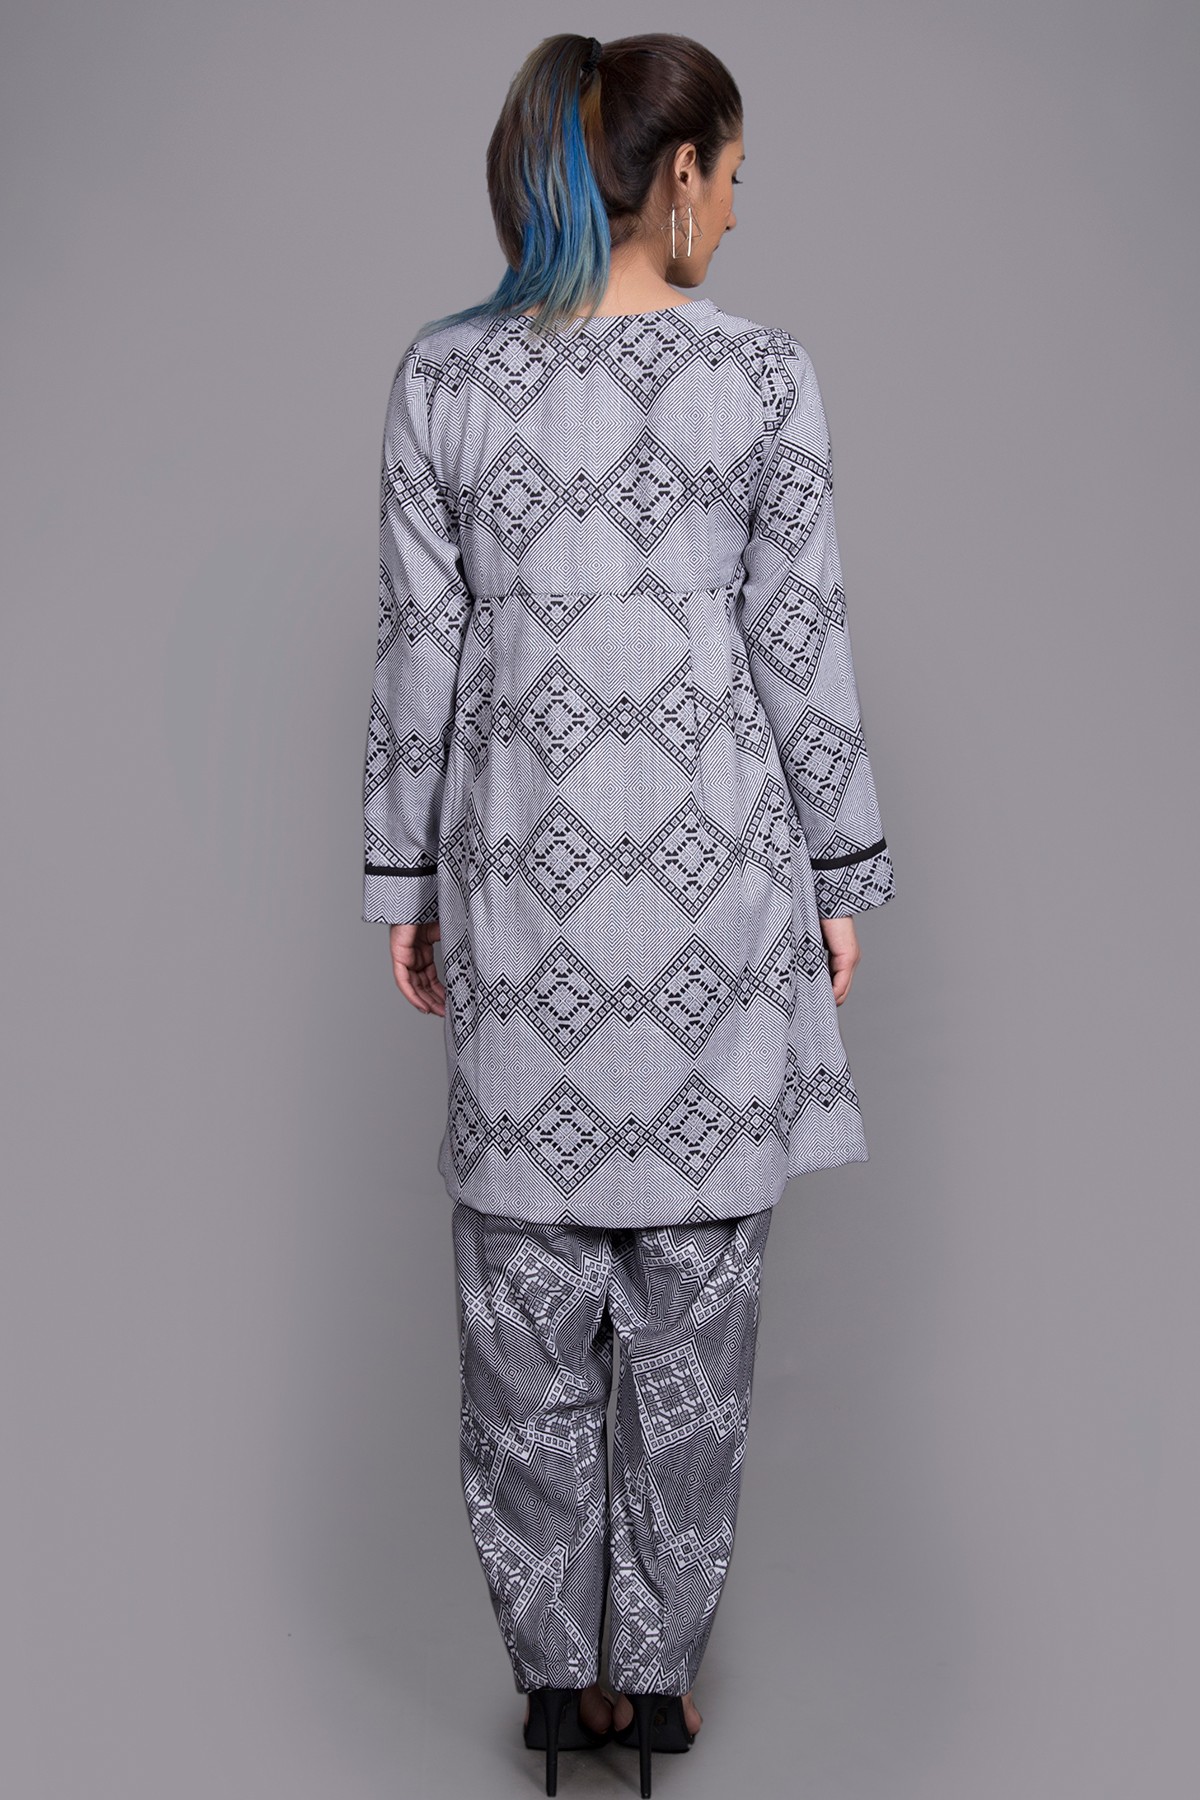 Black jacquard ready to wear dress by Generation casuals 2019